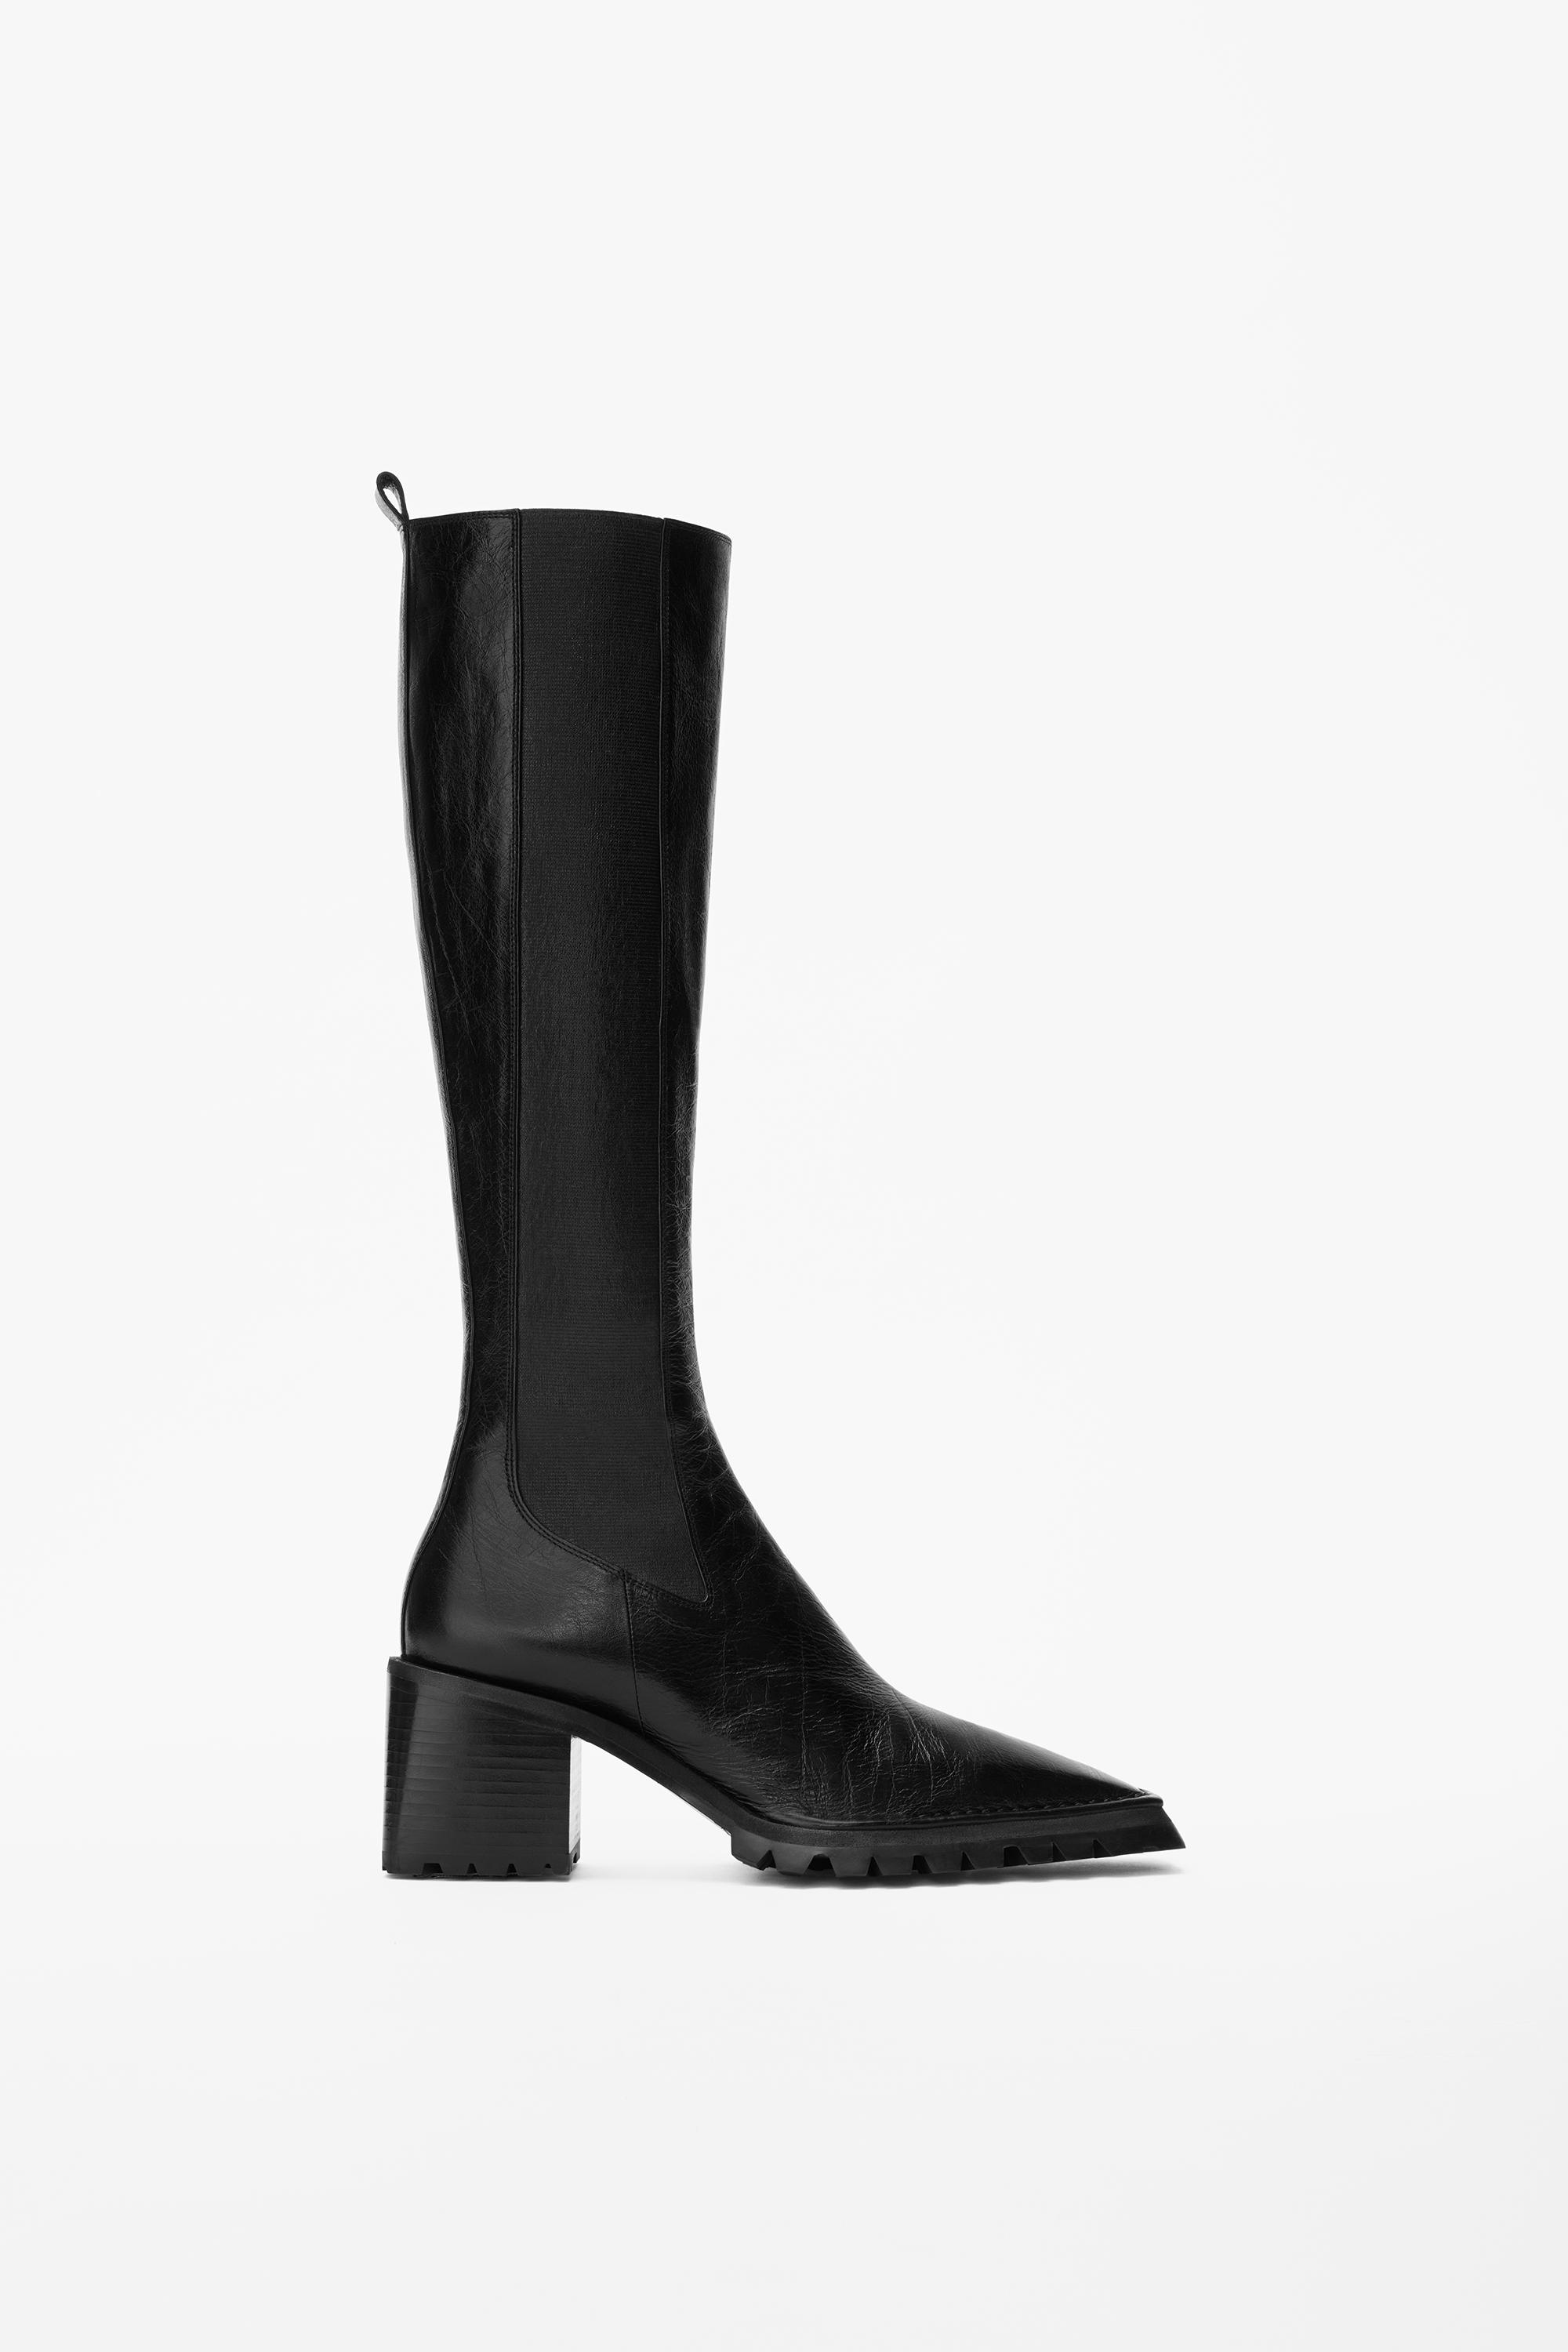 Alexander Wang Leather Parker Knee High Boot in Black - Lyst